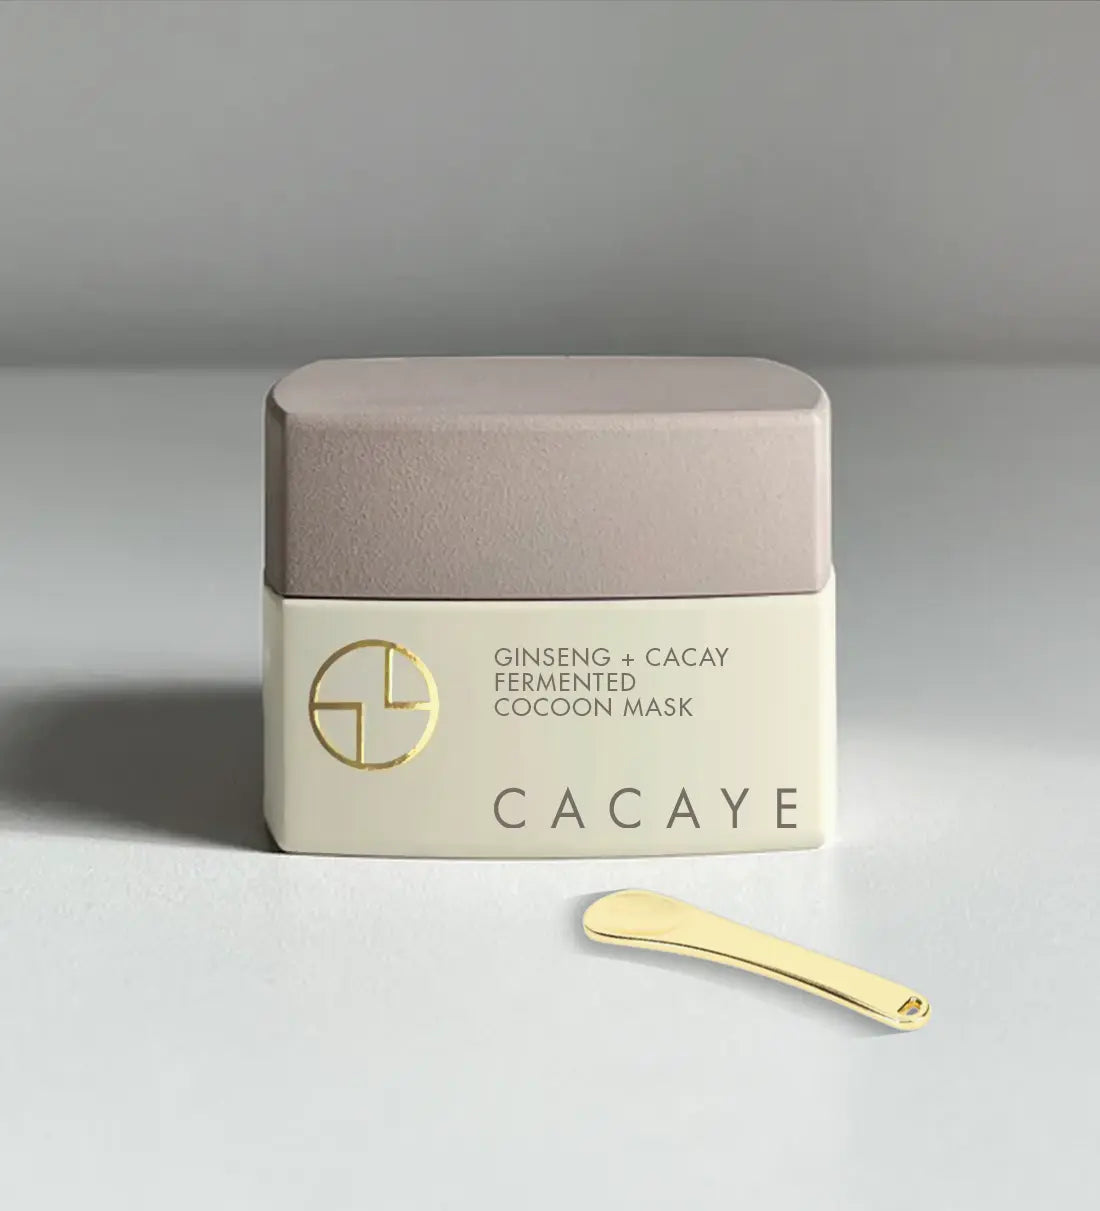 CACAYE GINSENG + CACAY FERMENTED COCOON MASK WITH FREE SPATULA IN GLASS JAR